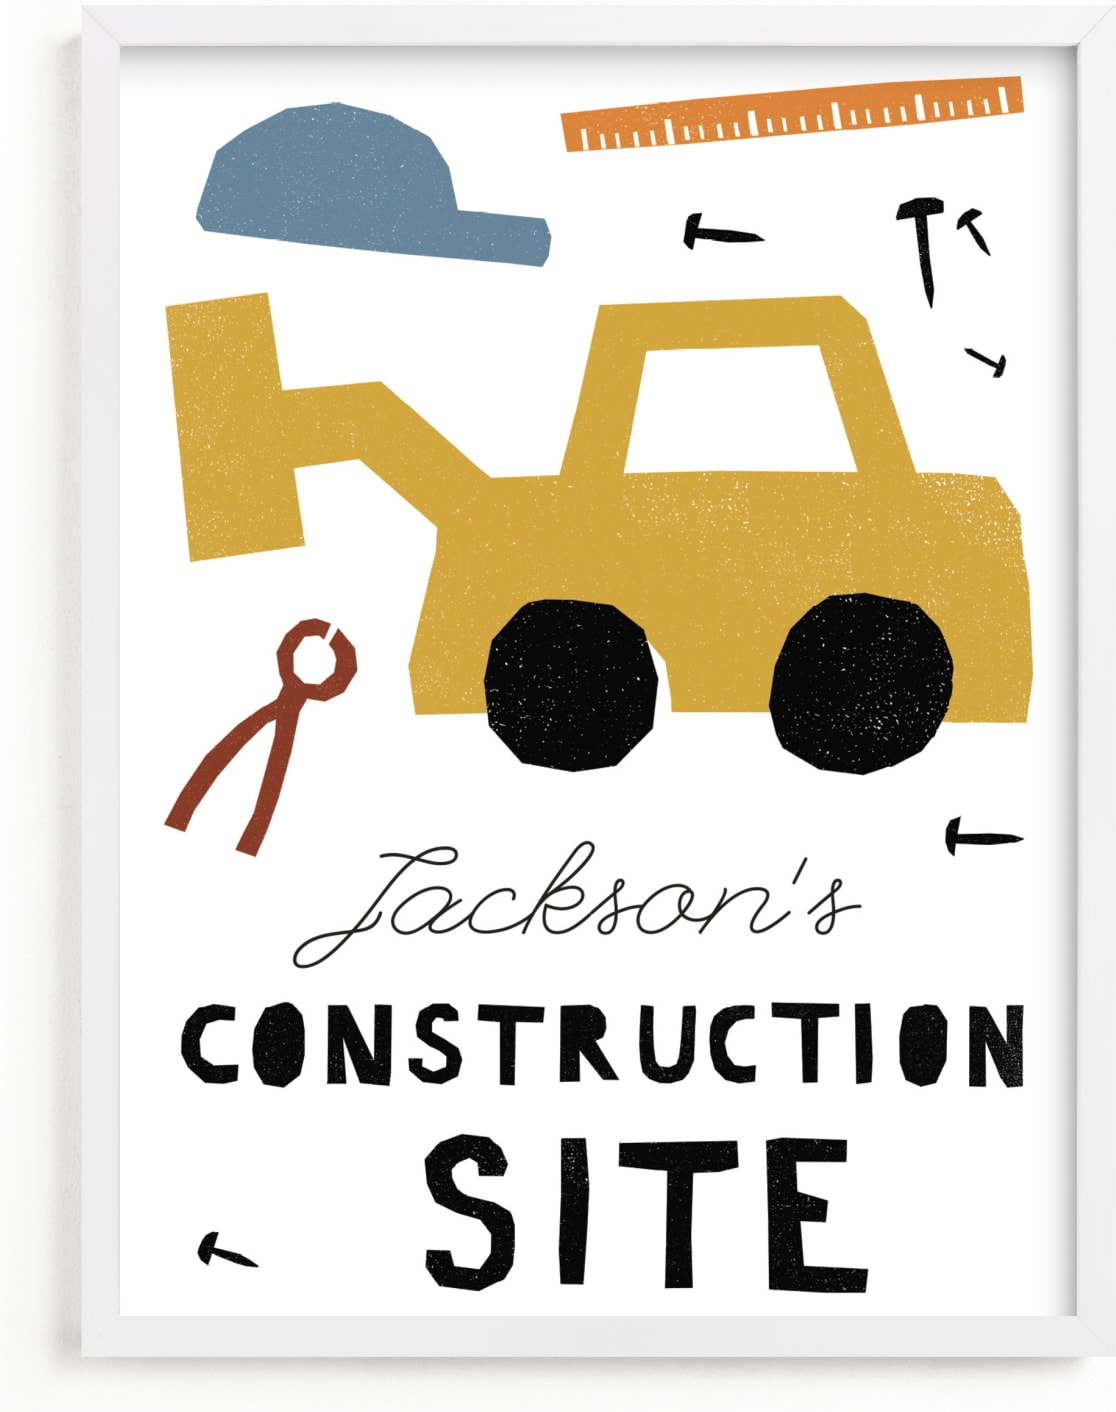 This is a colorful personalized art for kid by Sumak Studio called construction site.